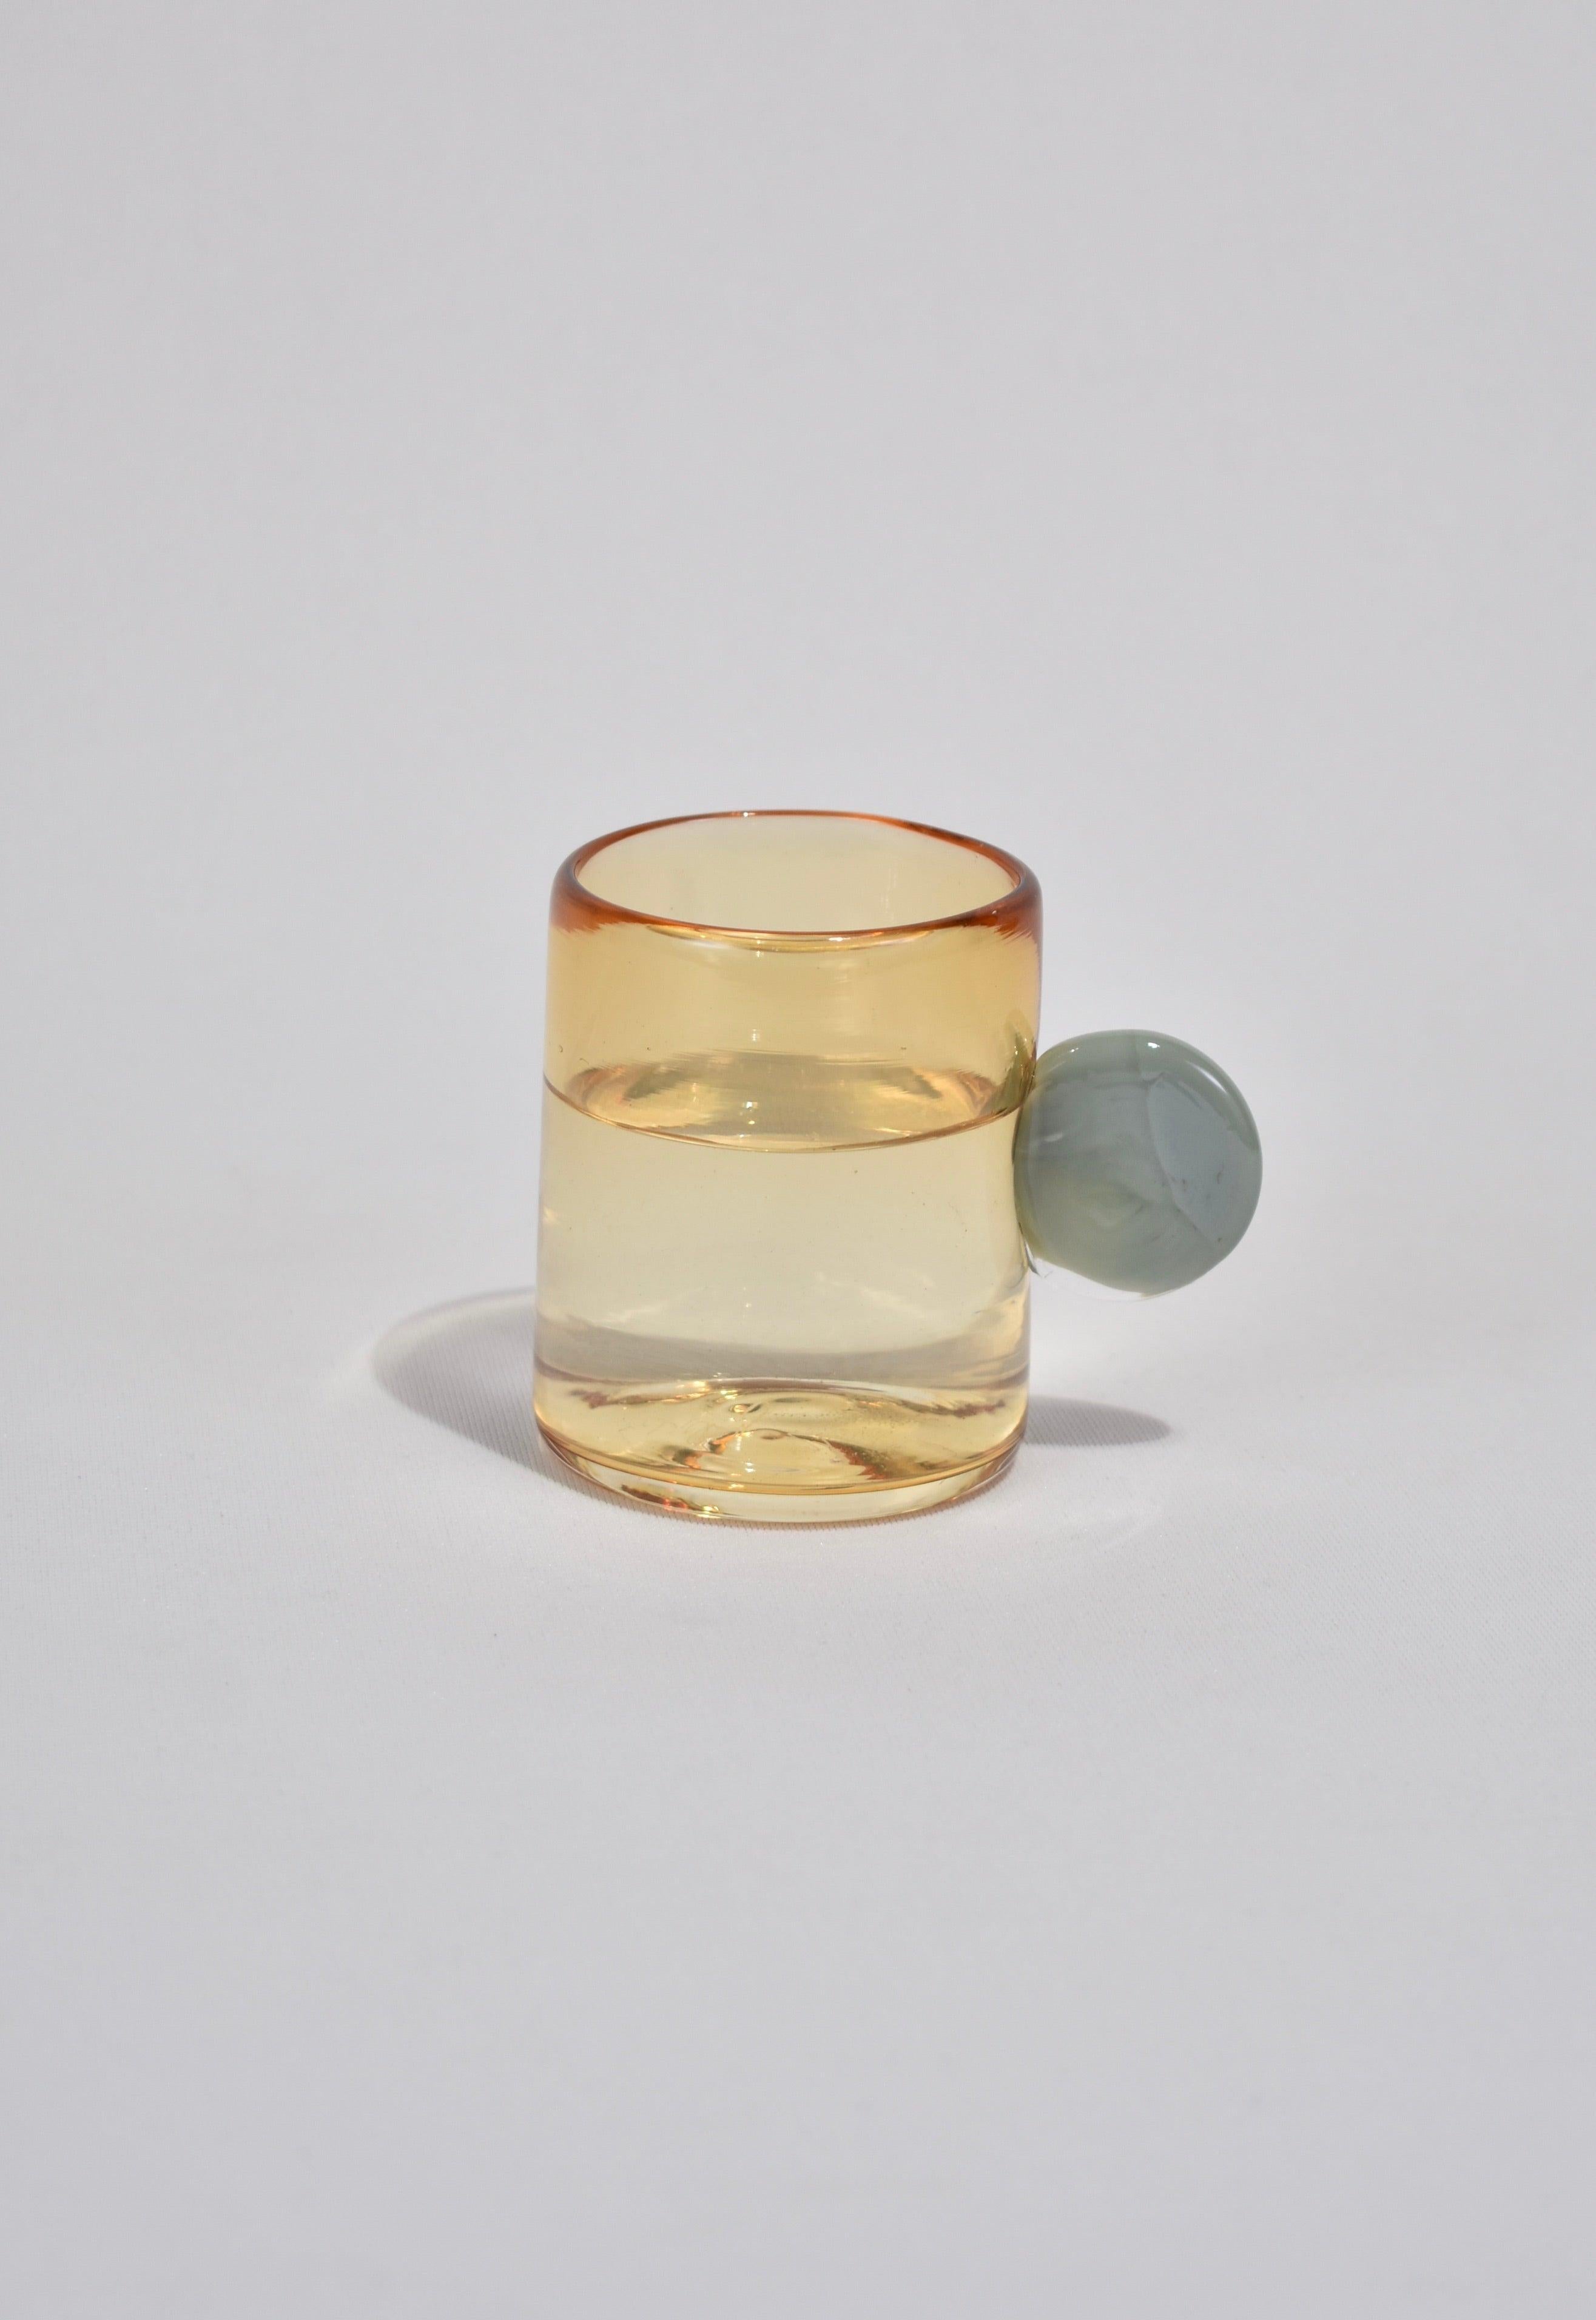 Blown glass tumbler in whiskey with a grey handle. Perfect size for water, wine, juice, or spirits. Handmade in USA by Grace Whiteside of sticky glass.

Please note: Due to the handmade nature of this cup, subtle variations in form and finish are